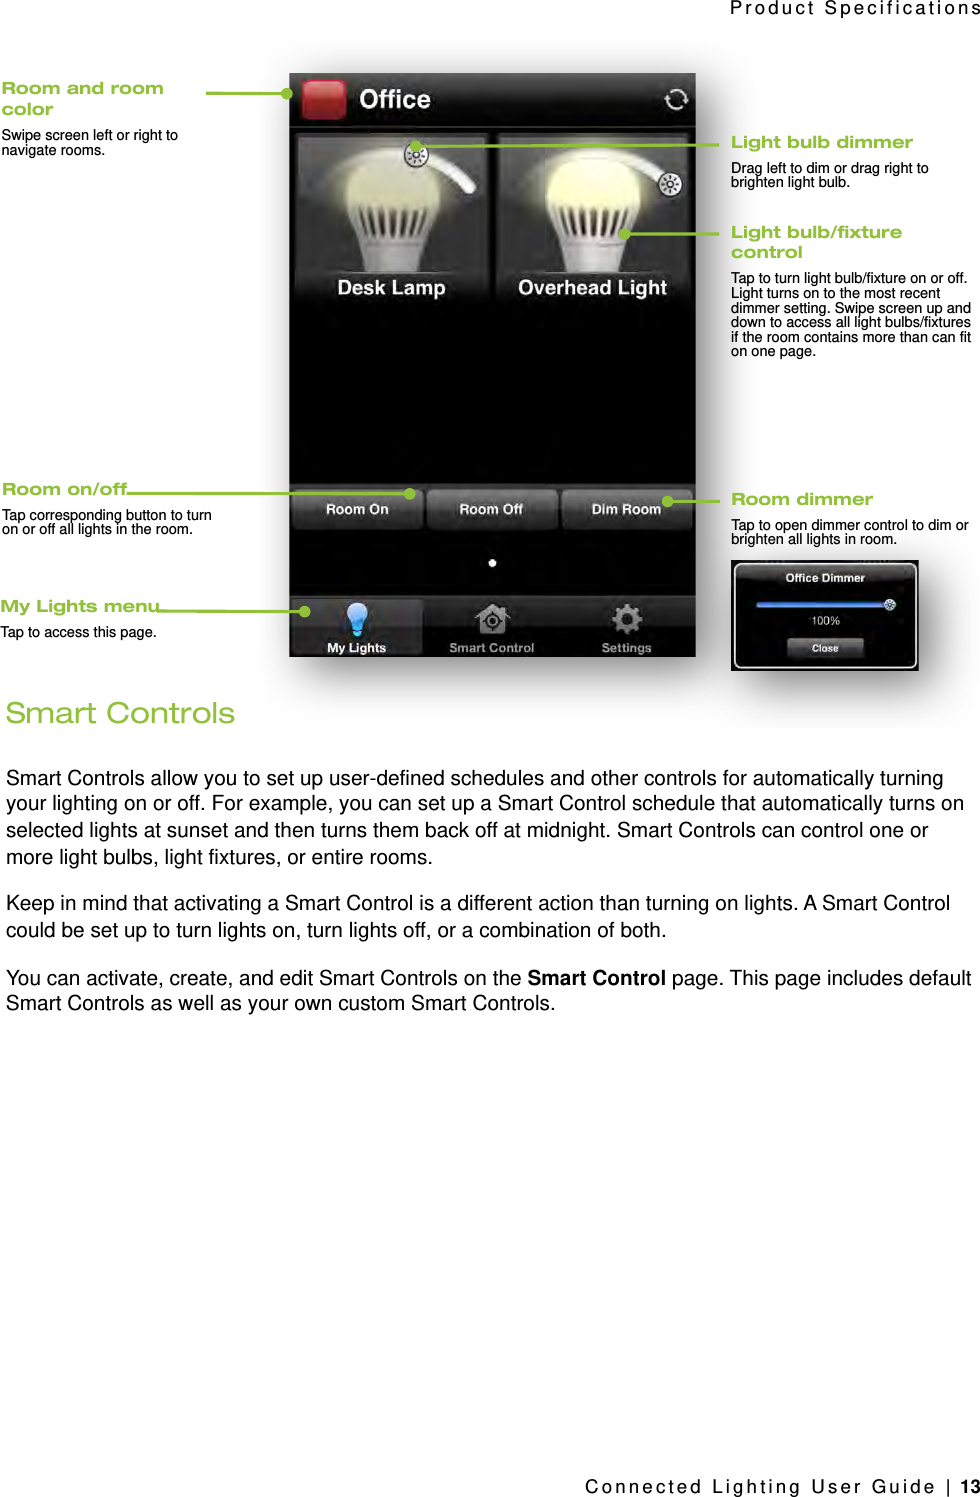 Smart ControlsSmart Controls allow you to set up user-defined schedules and other controls for automatically turning your lighting on or off. For example, you can set up a Smart Control schedule that automatically turns on selected lights at sunset and then turns them back off at midnight. Smart Controls can control one or more light bulbs, light fixtures, or entire rooms.Keep in mind that activating a Smart Control is a different action than turning on lights. A Smart Control could be set up to turn lights on, turn lights off, or a combination of both. You can activate, create, and edit Smart Controls on the Smart Control page. This page includes default Smart Controls as well as your own custom Smart Controls.Product SpecificationsConnected Lighting User Guide | 13Light bulb dimmerDrag left to dim or drag right to brighten light bulb.Room and room colorSwipe screen left or right to navigate rooms.Light bulb/xture controlTap to turn light bulb/fixture on or off. Light turns on to the most recent dimmer setting. Swipe screen up and down to access all light bulbs/fixtures if the room contains more than can fit on one page.Room dimmerTap to open dimmer control to dim or brighten all lights in room.My Lights menuTap to access this page.Room on/offTap corresponding button to turn on or off all lights in the room.